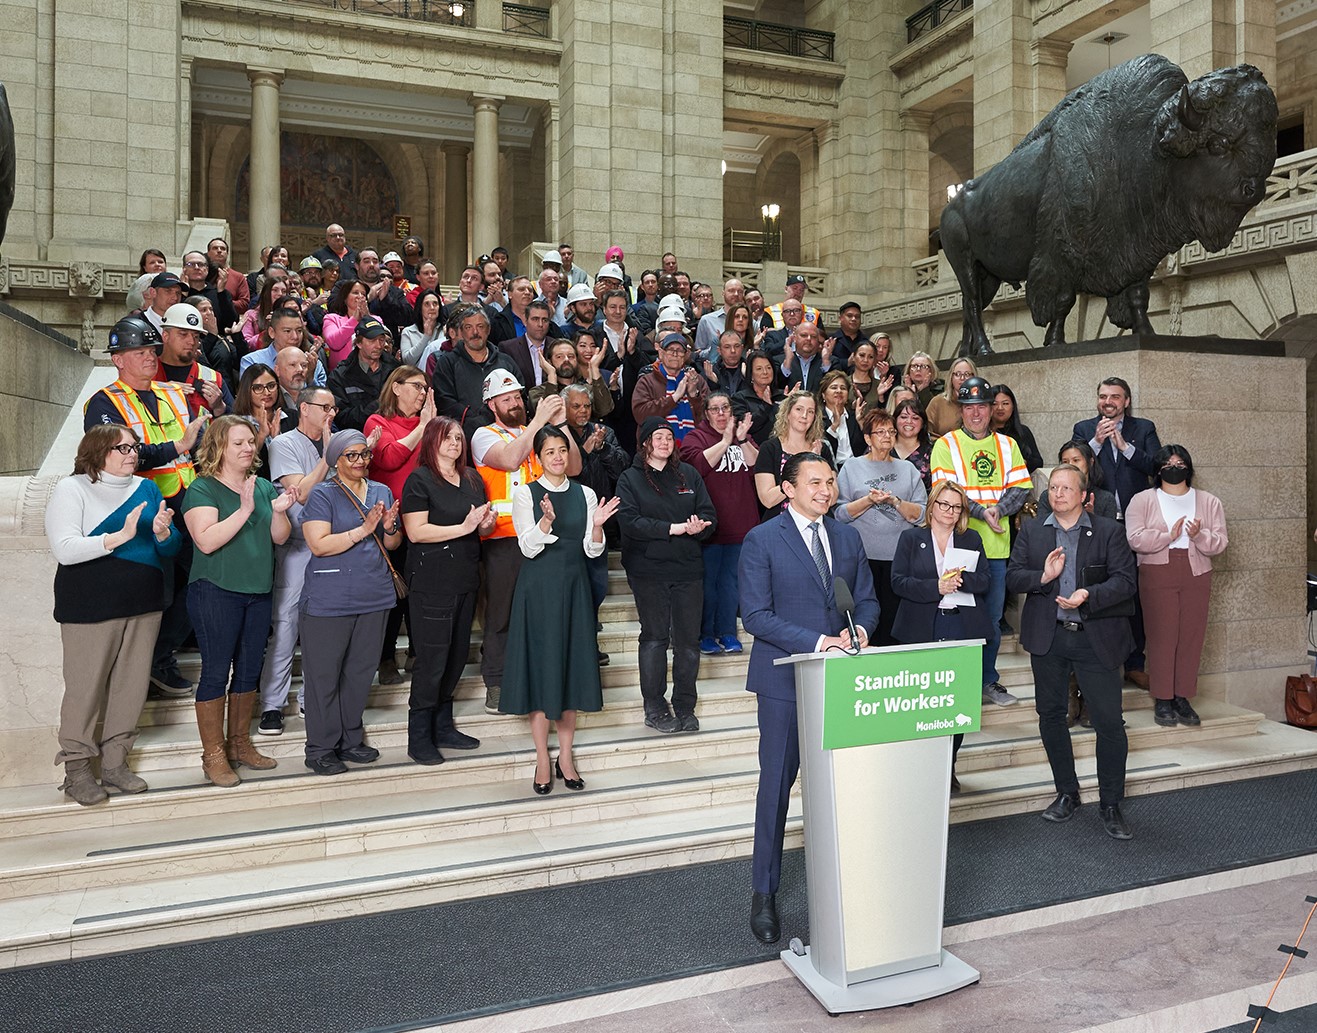 Picture of Manitoba Premier, Wab Kinew, at microphone on steps of legislature with a crowd behind him.